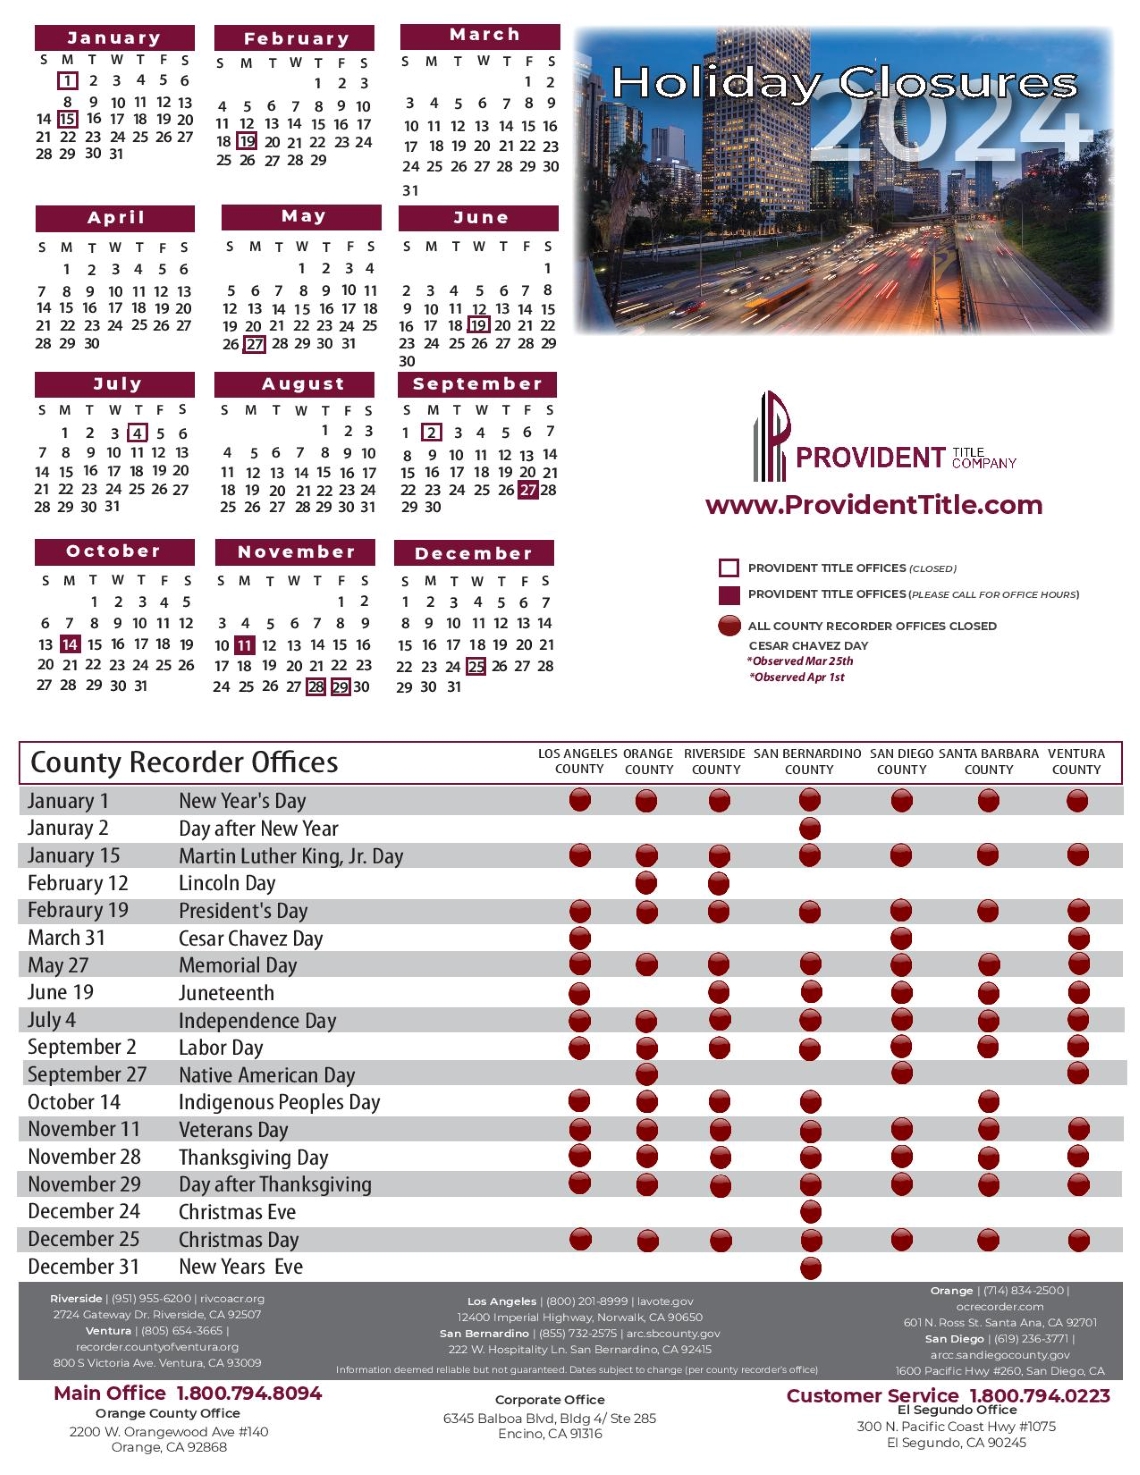 Provident-County-Recorder-Calendar-2024-Revised